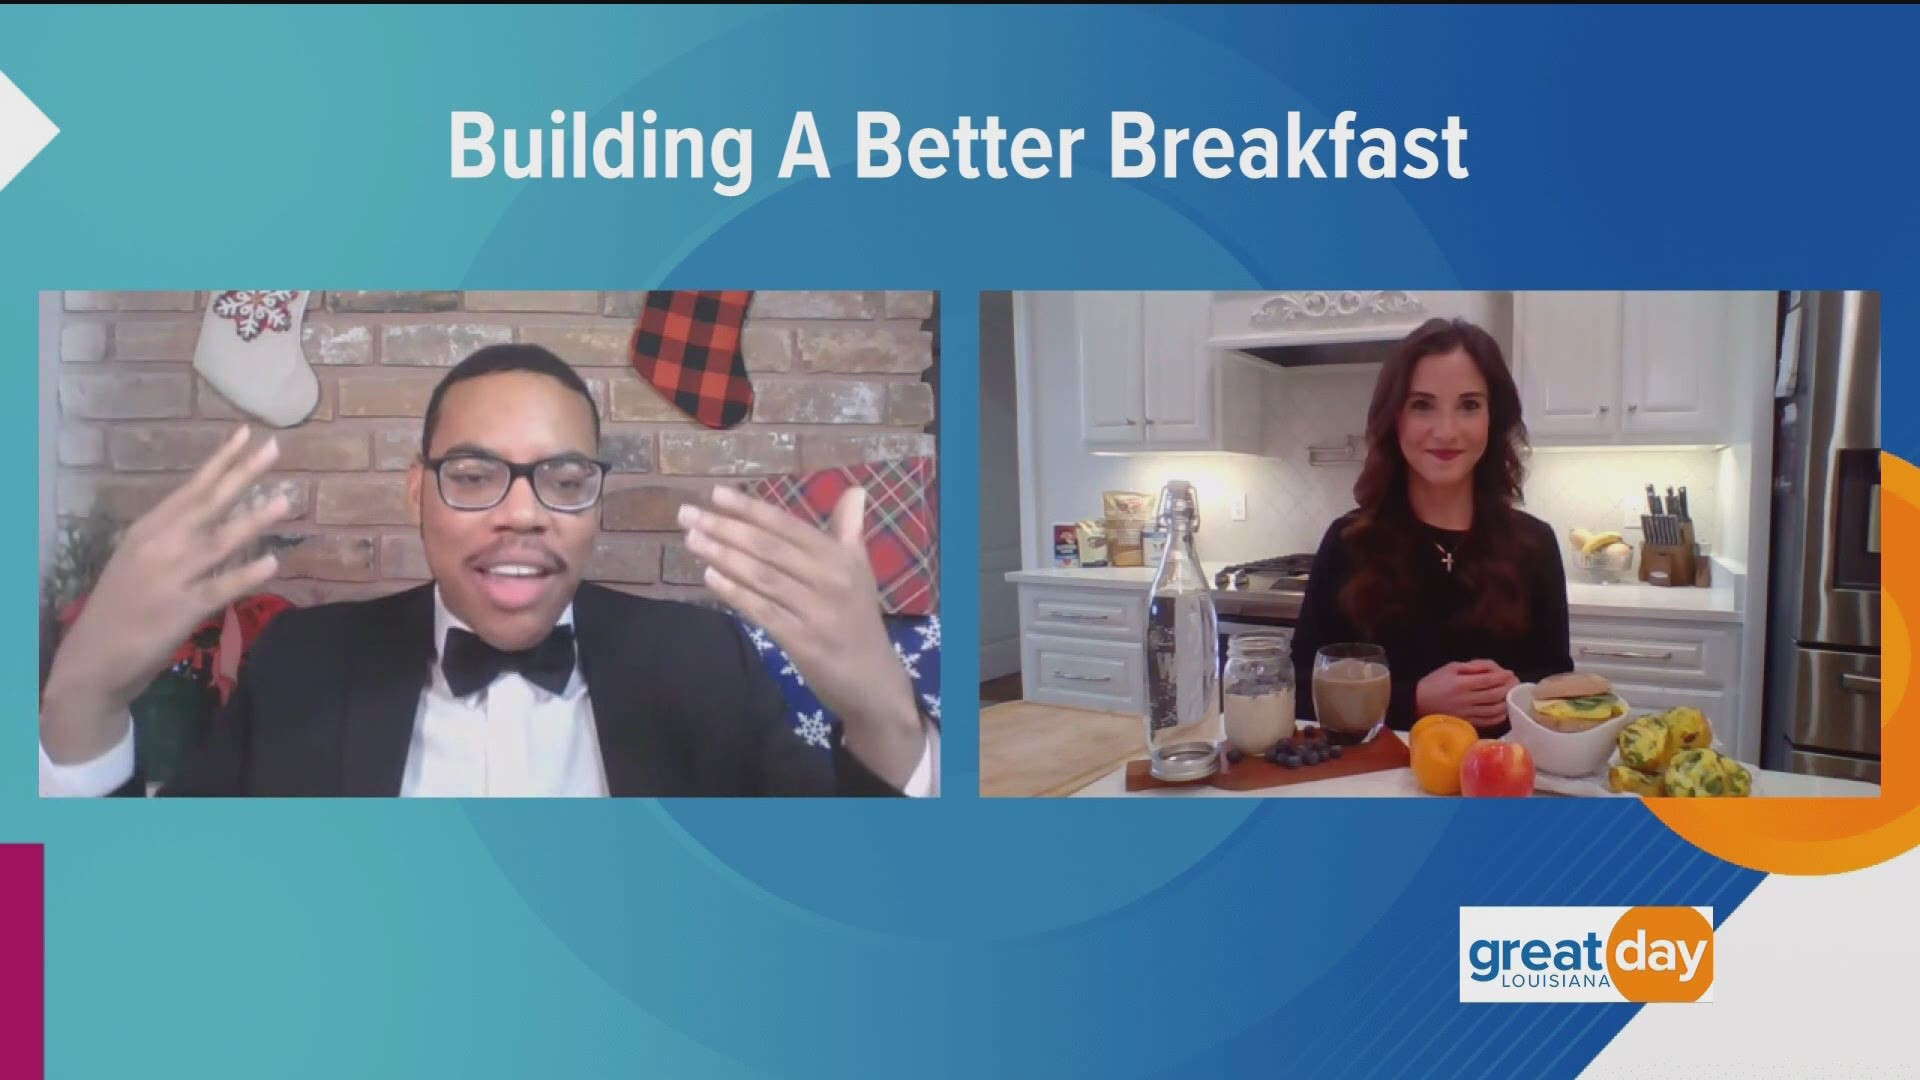 A wellness consultant discussed tips on how to eat better breakfast foods in 2021.